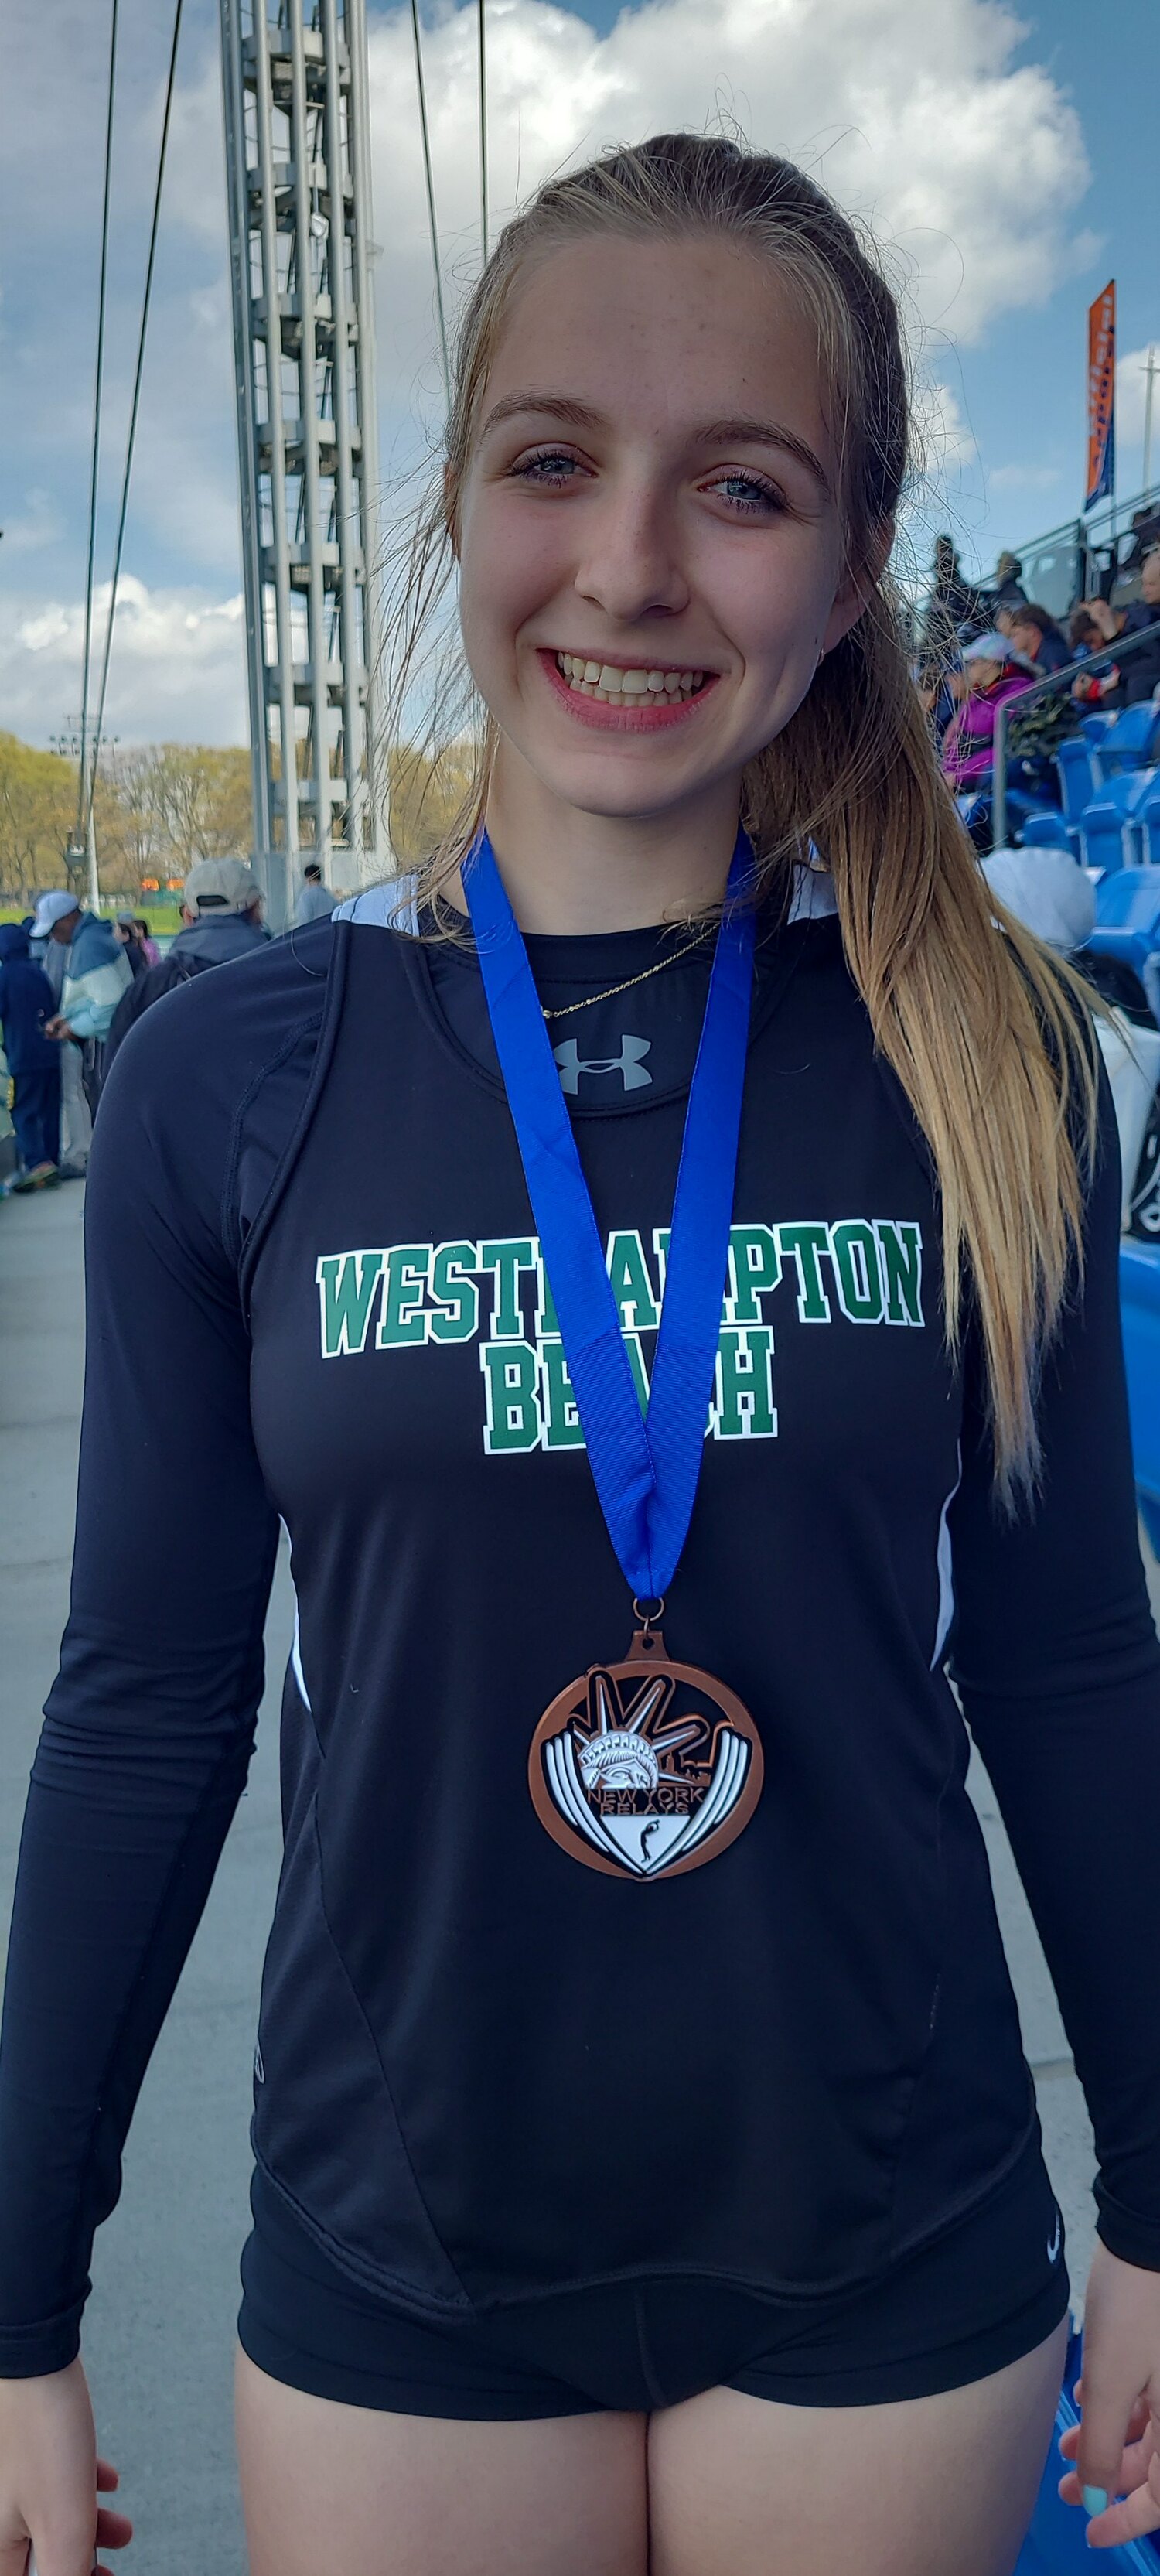 Madison Phillips earned a bronze medal in the heptathlon at the New York Relays on 19 and 20.   COURTESY JOHN BROICH